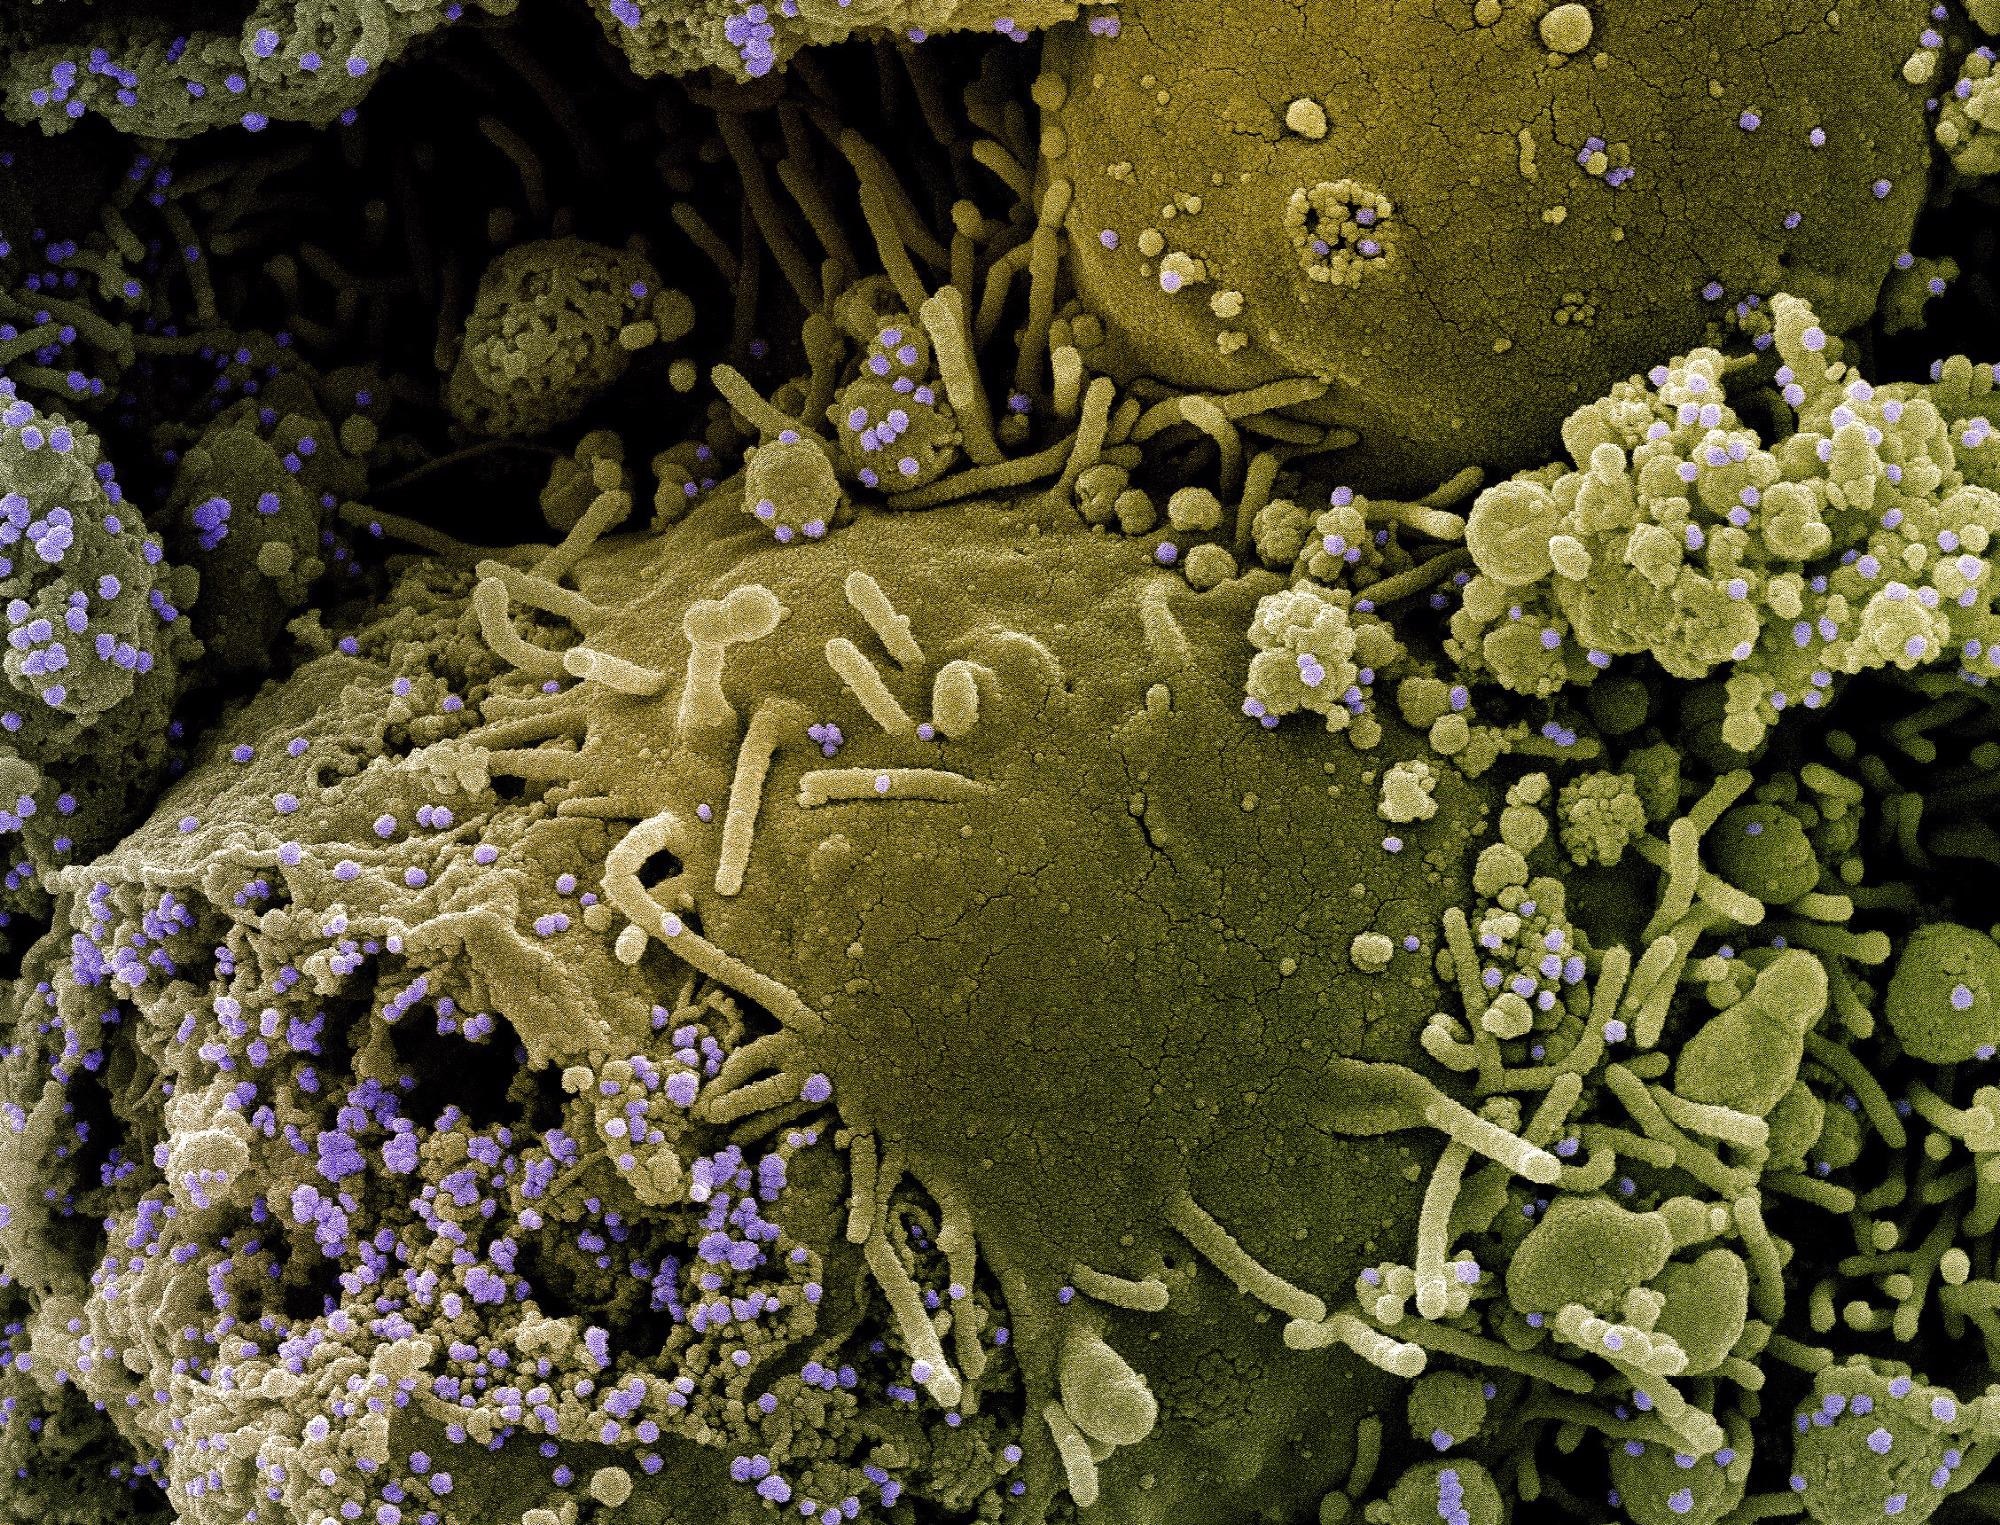 Colorized scanning electron micrograph of chronically infected and partially lysed cells (olive green) infected with a variant strain of SARS-CoV-2 virus particles (purple), isolated from a patient specimen.  Image credit: NIAID